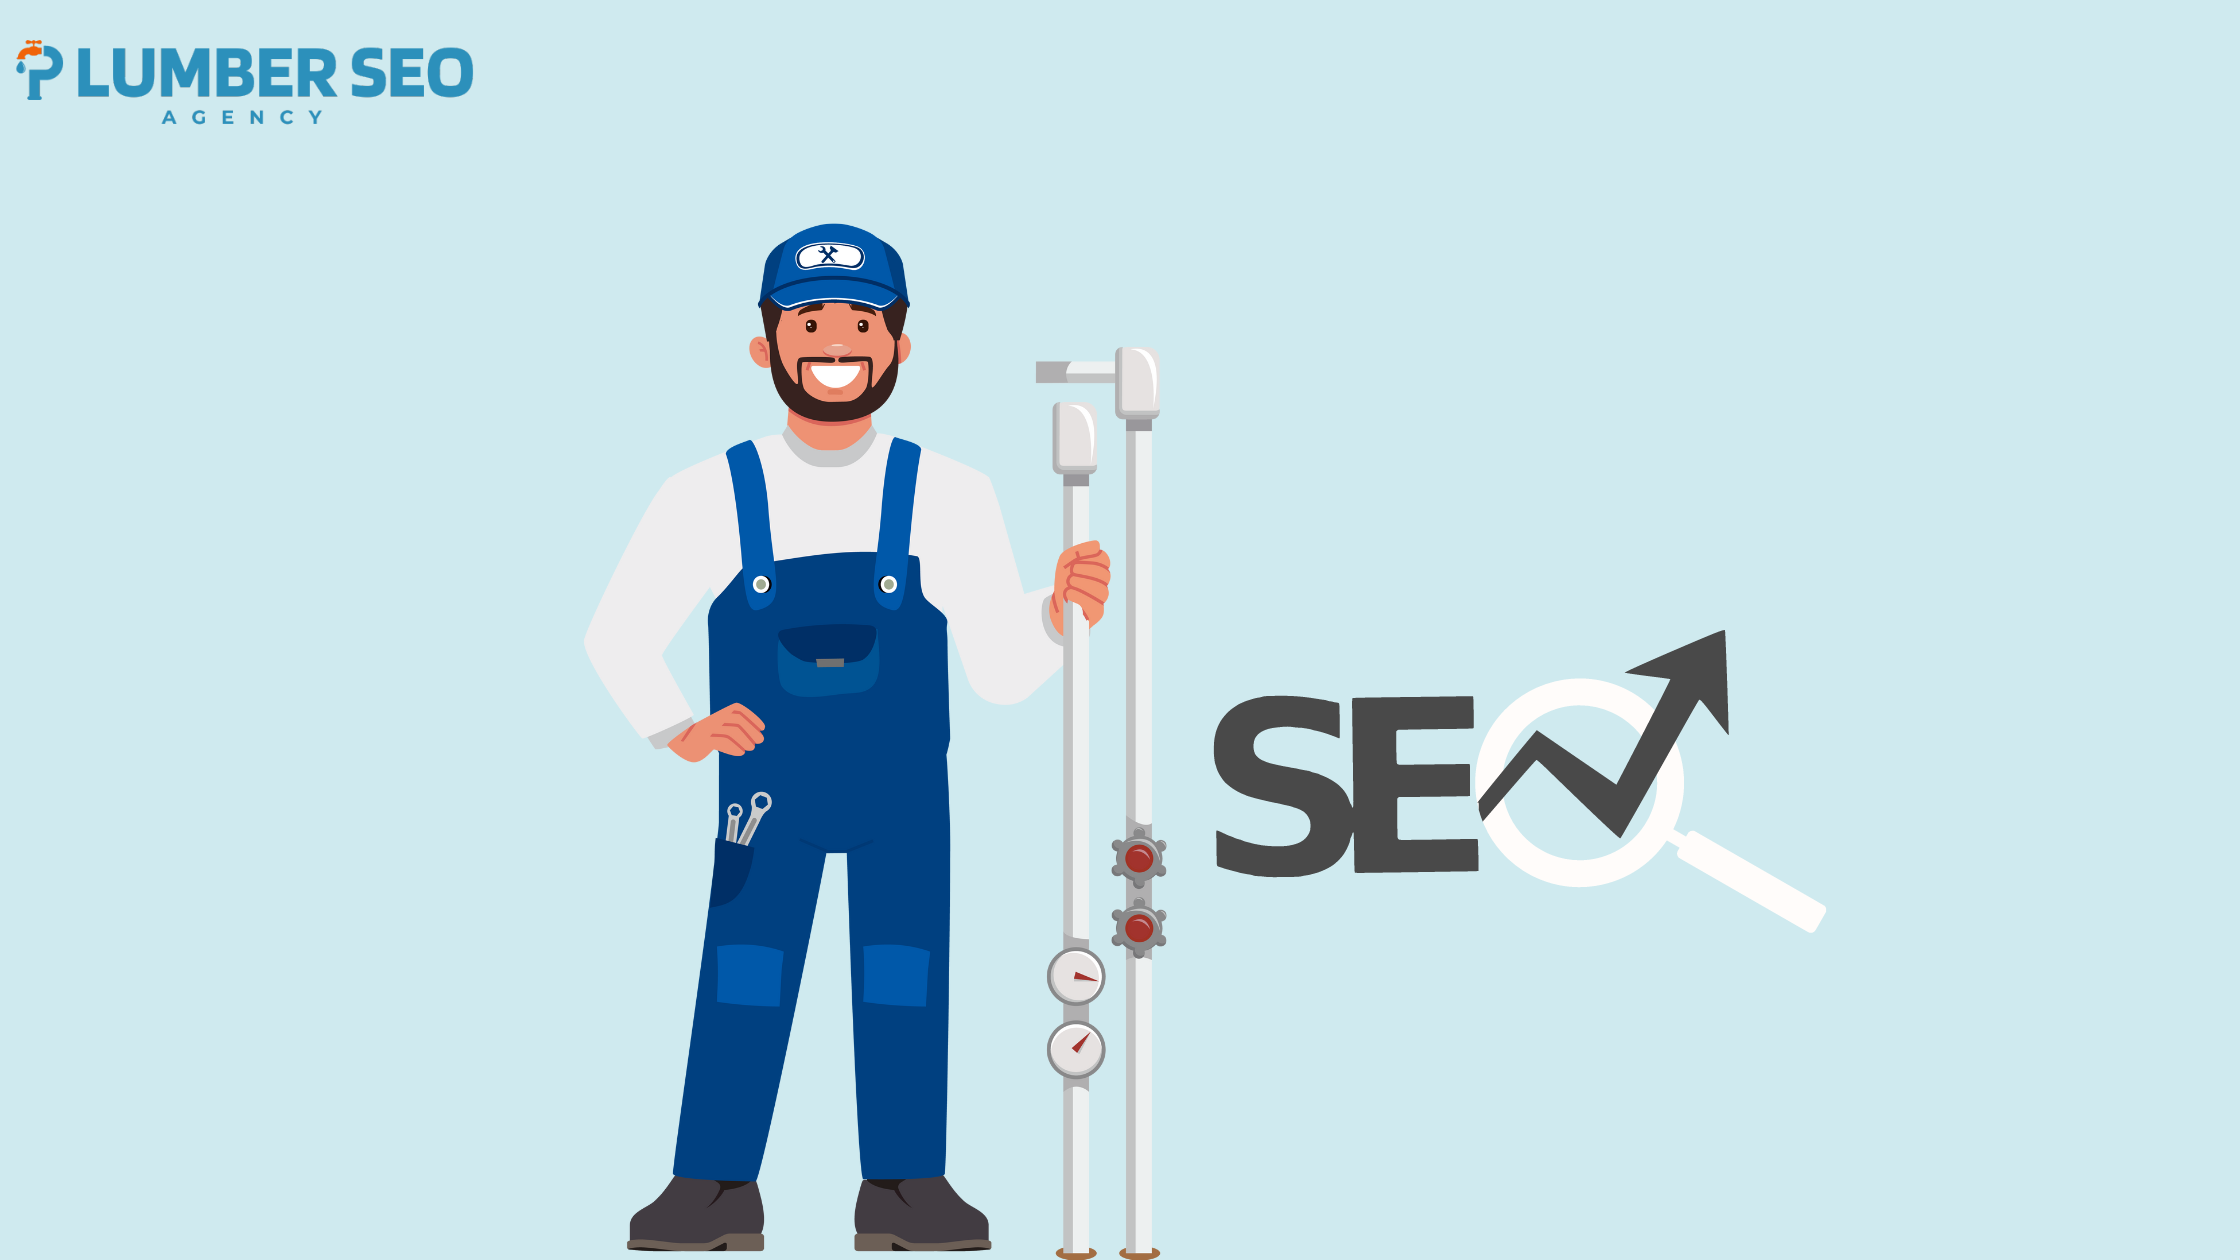 SEO For Plumber: The 4 Pillars Of Successful SEO Campaigns